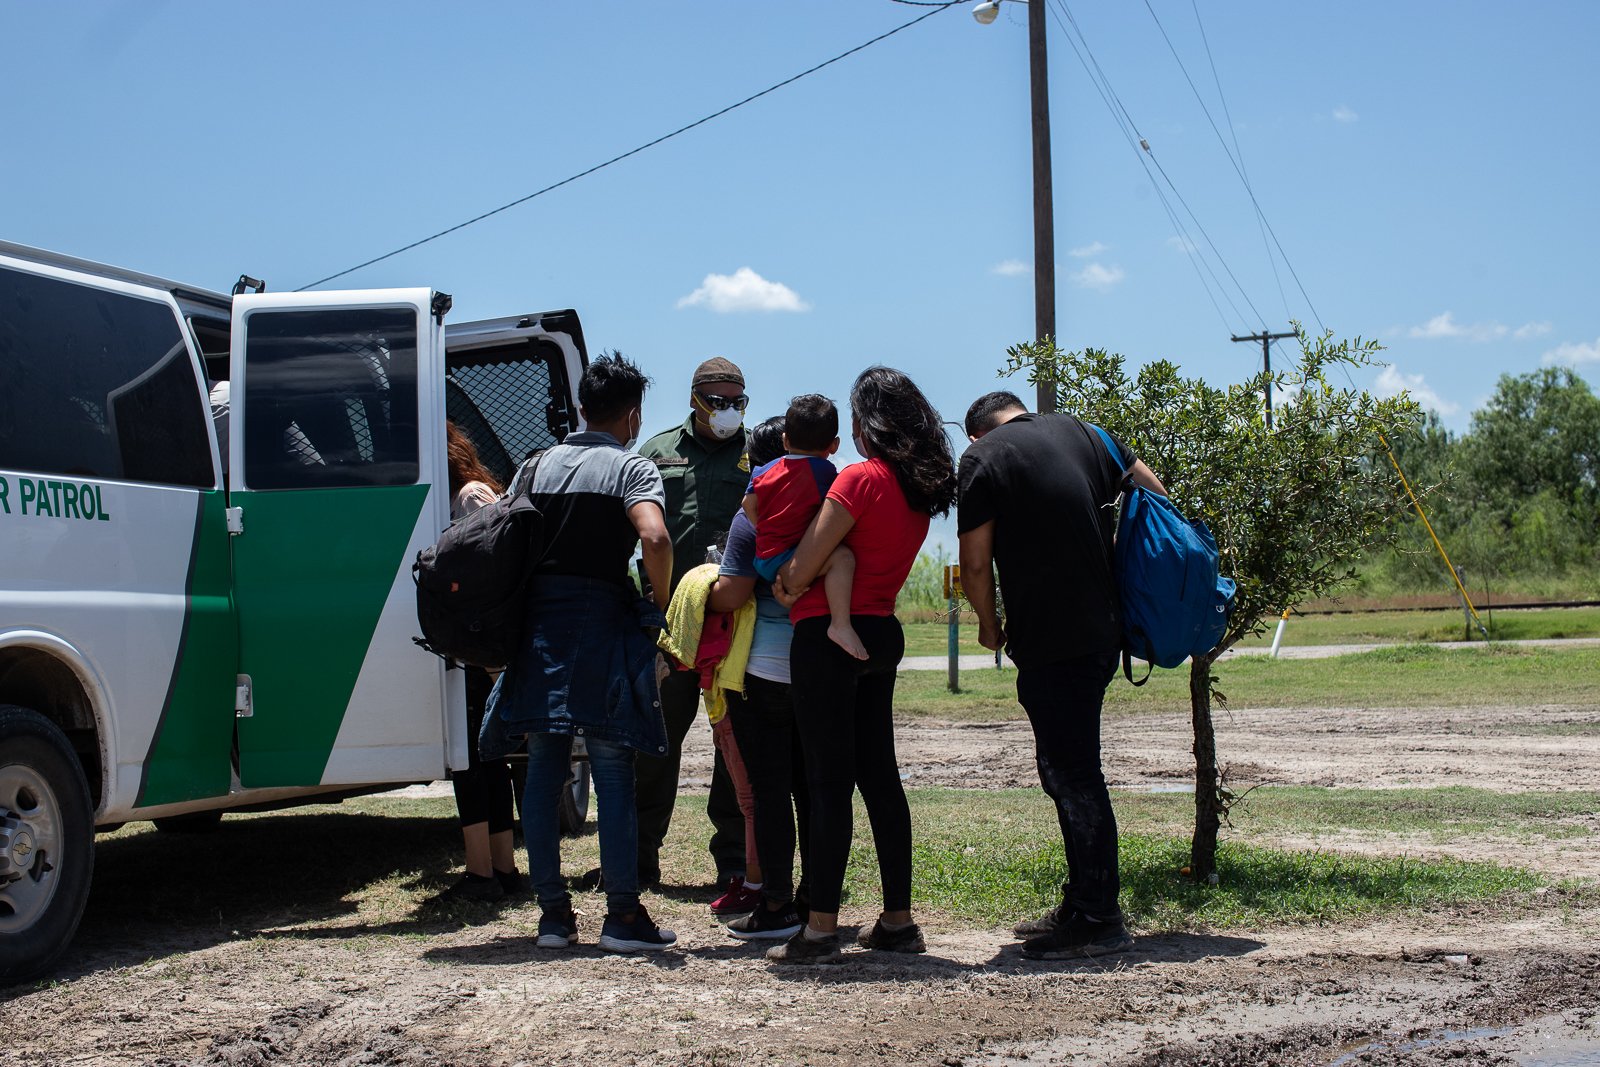 Migrants make their way to a Border Patrol transport vehicle after illegally entering the U.S. near ​La Joya, Texas, on August 7, 2021. (Kaylee Greenlee – Daily Caller News Foundation)